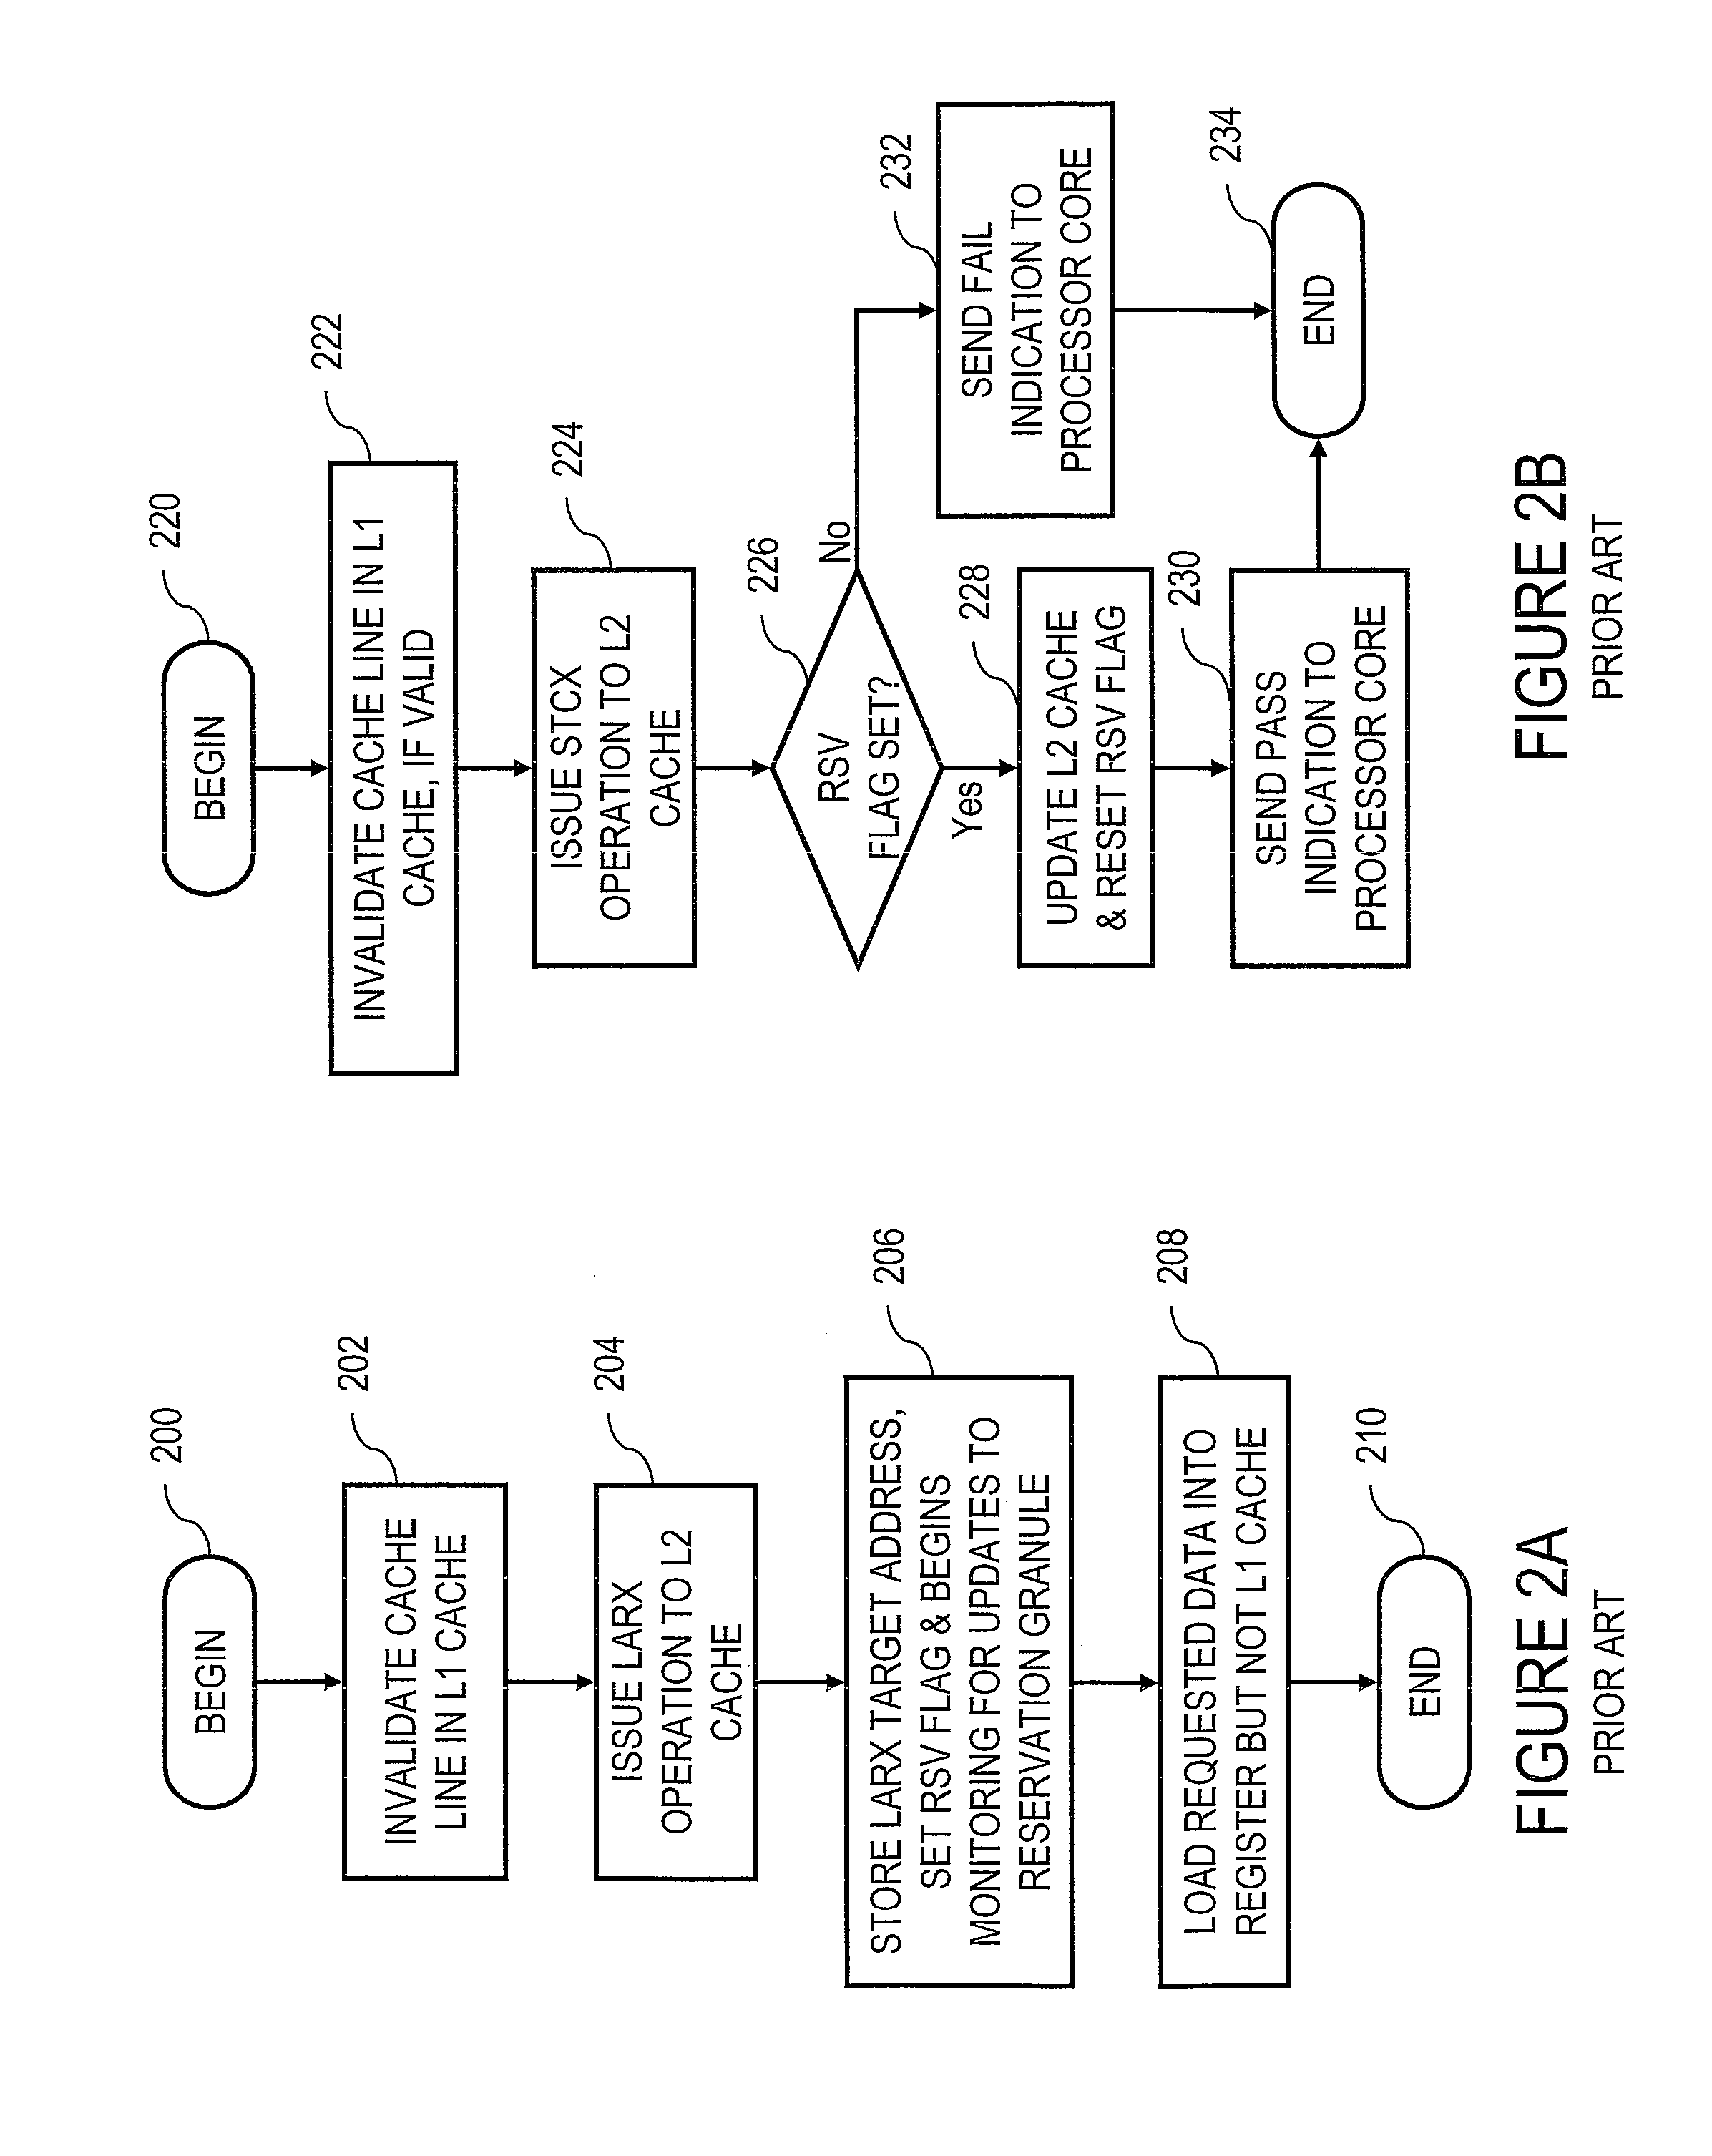 Synchronizing access to data in shared memory via upper level cache queuing